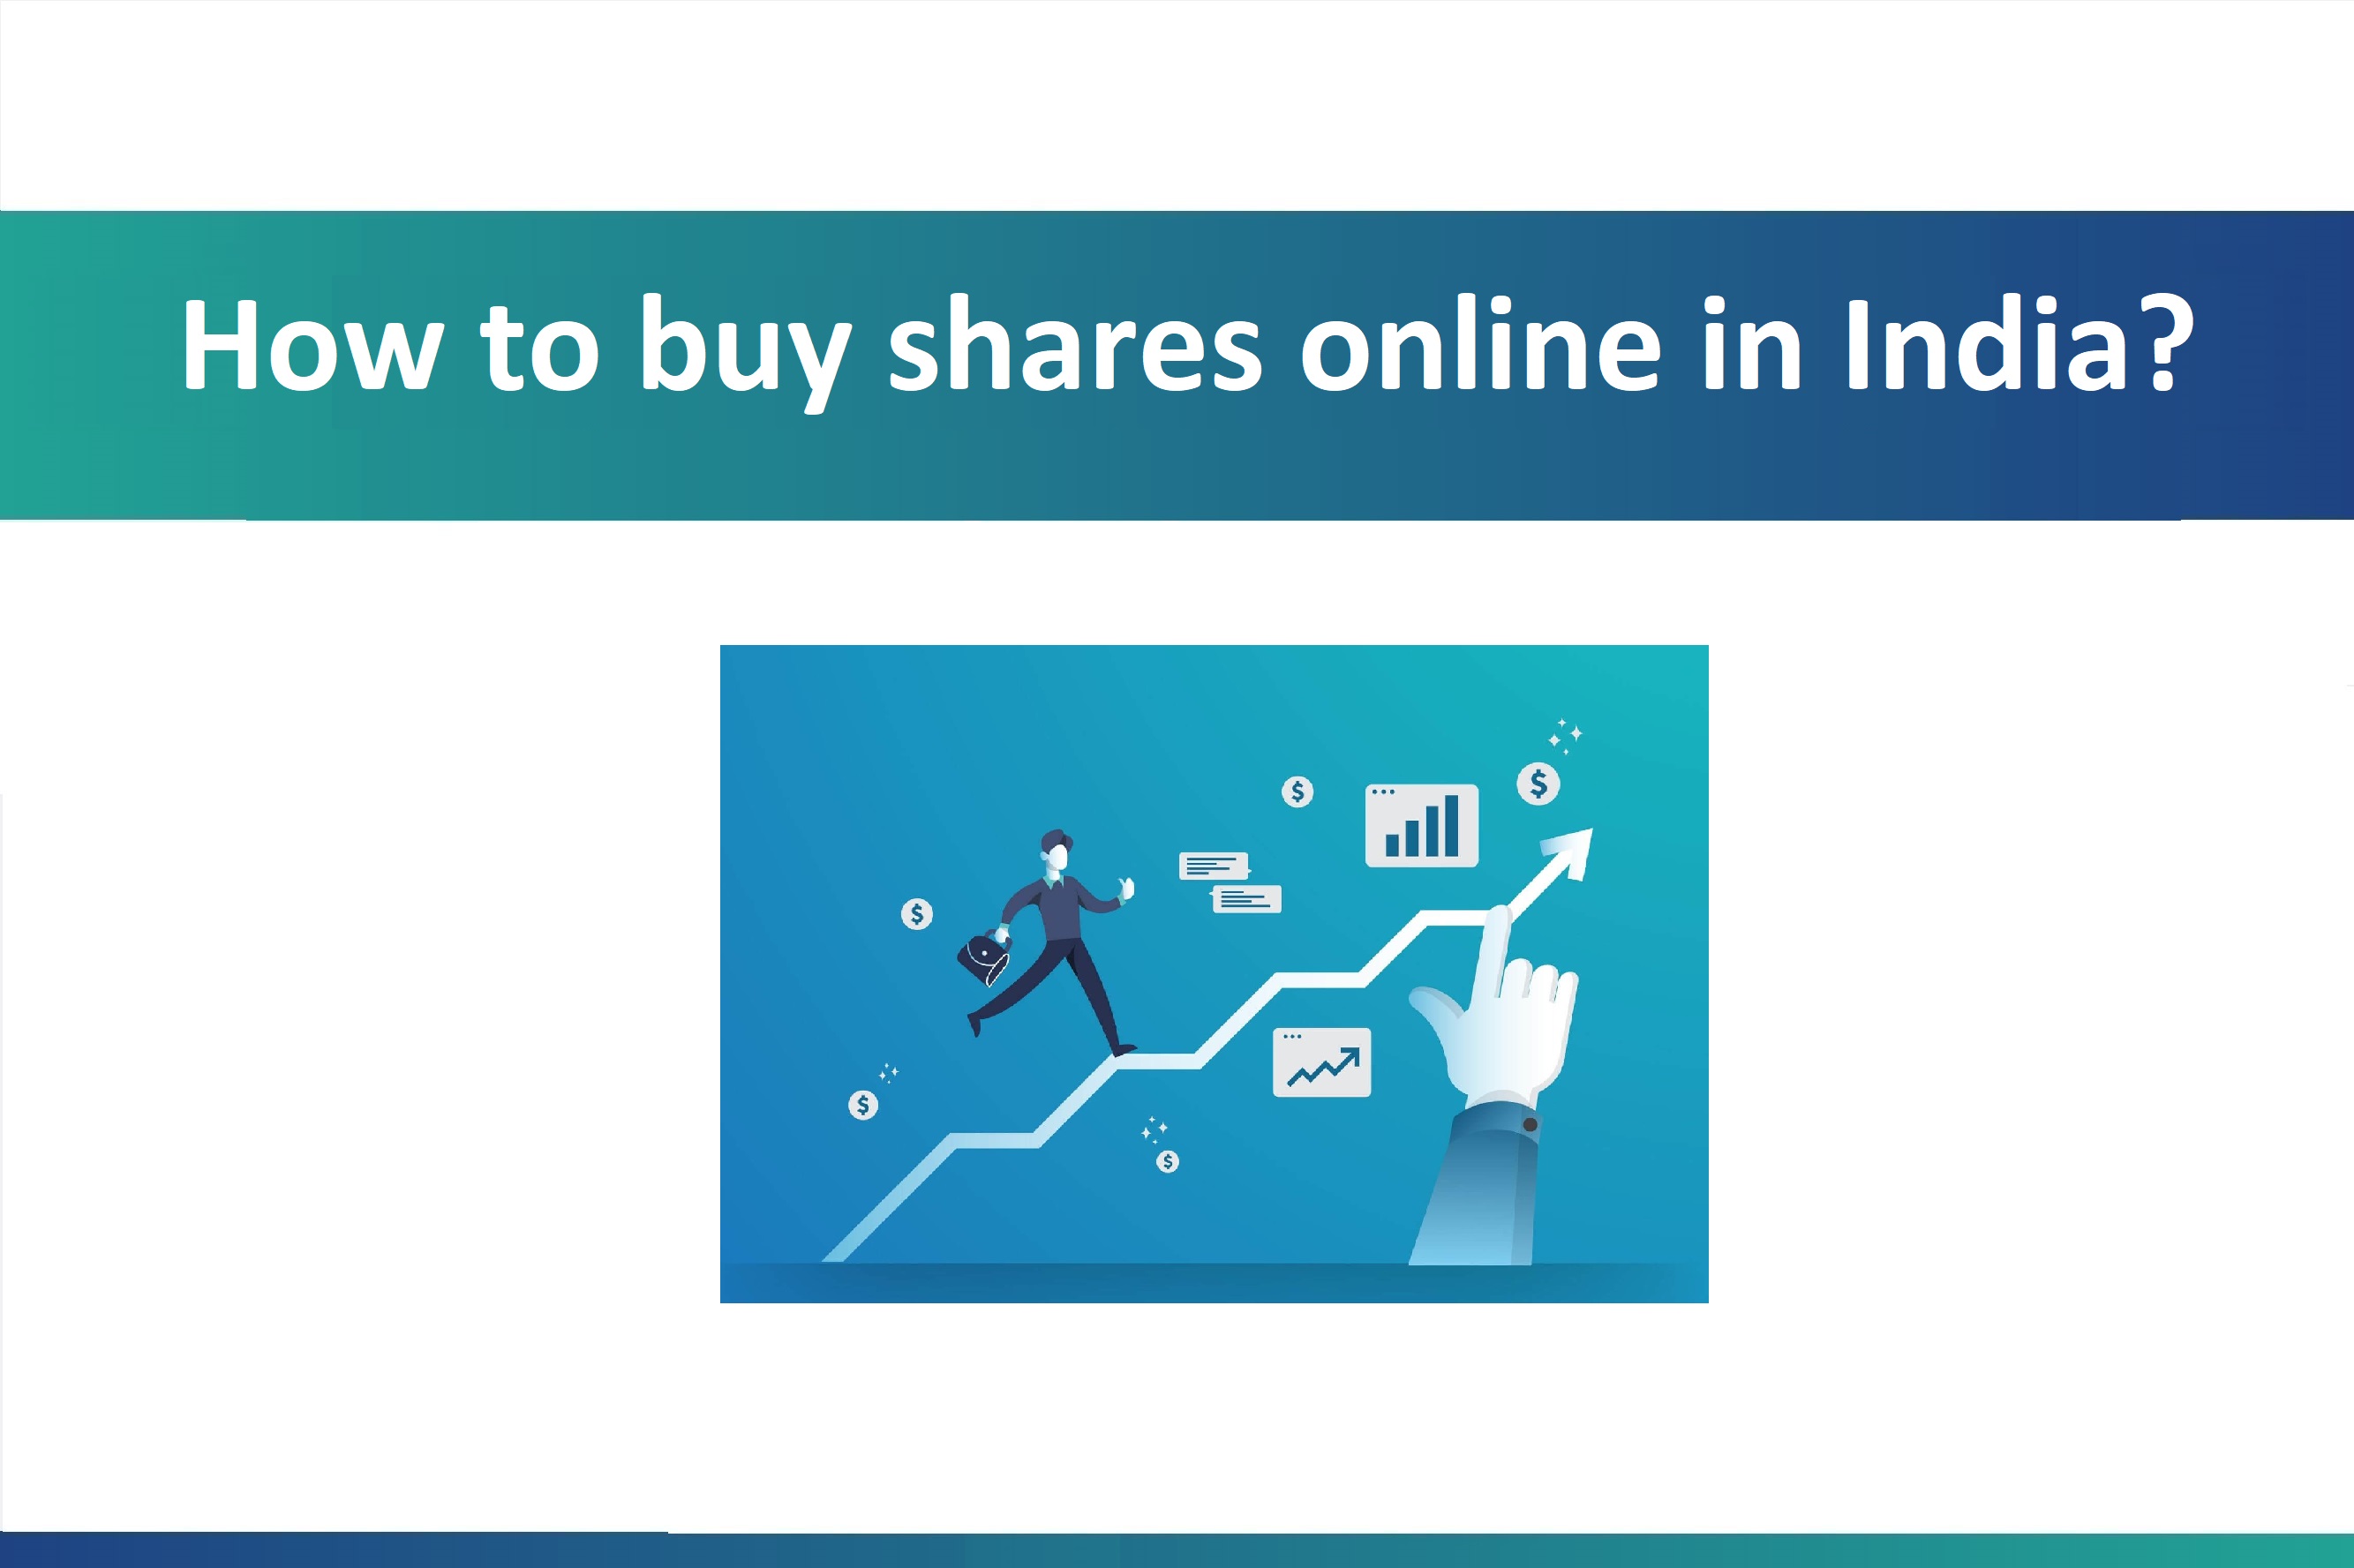 How to buy shares online in India?